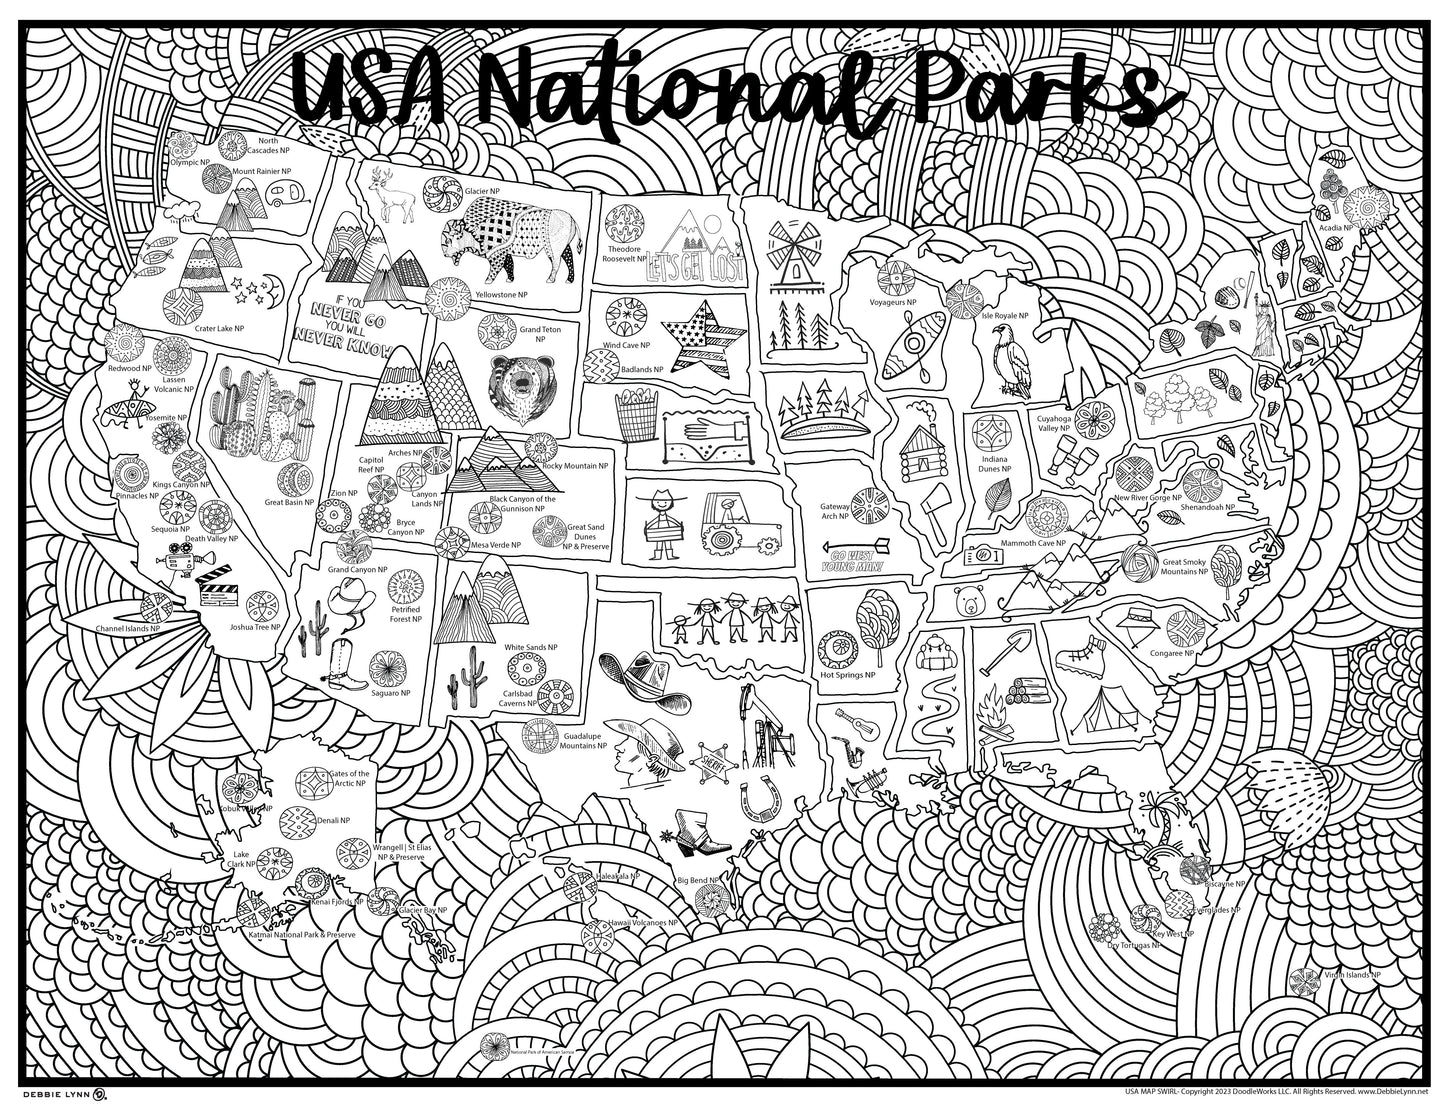 National Park Map Giant Coloring Poster 46"x60"